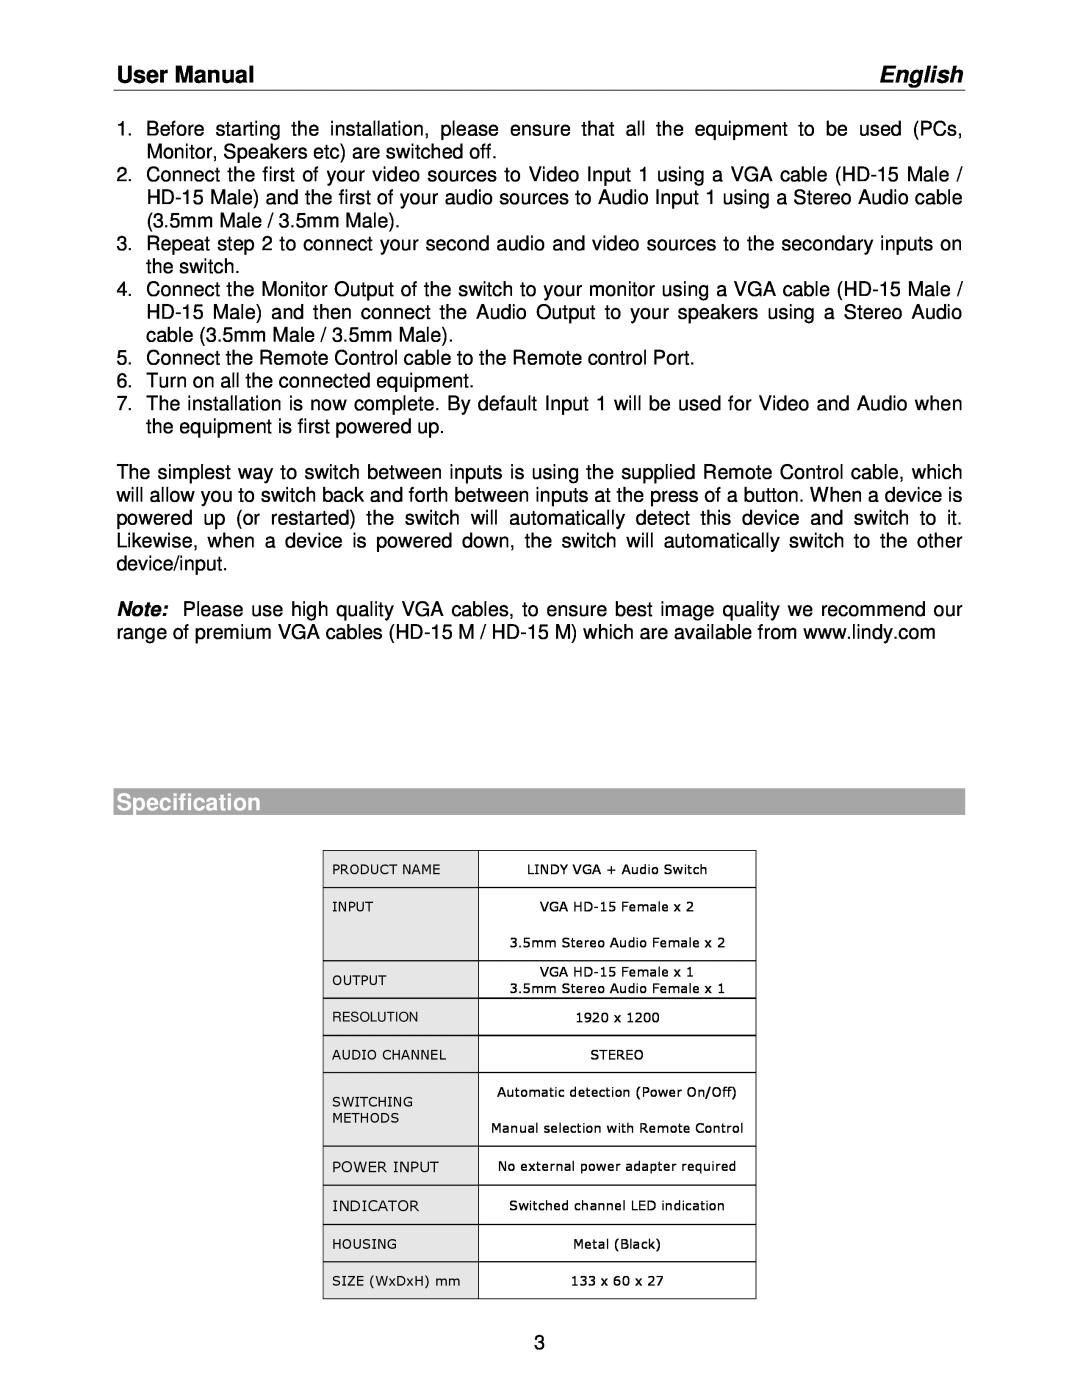 Lindy 32586 user manual Specification, User Manual, English 